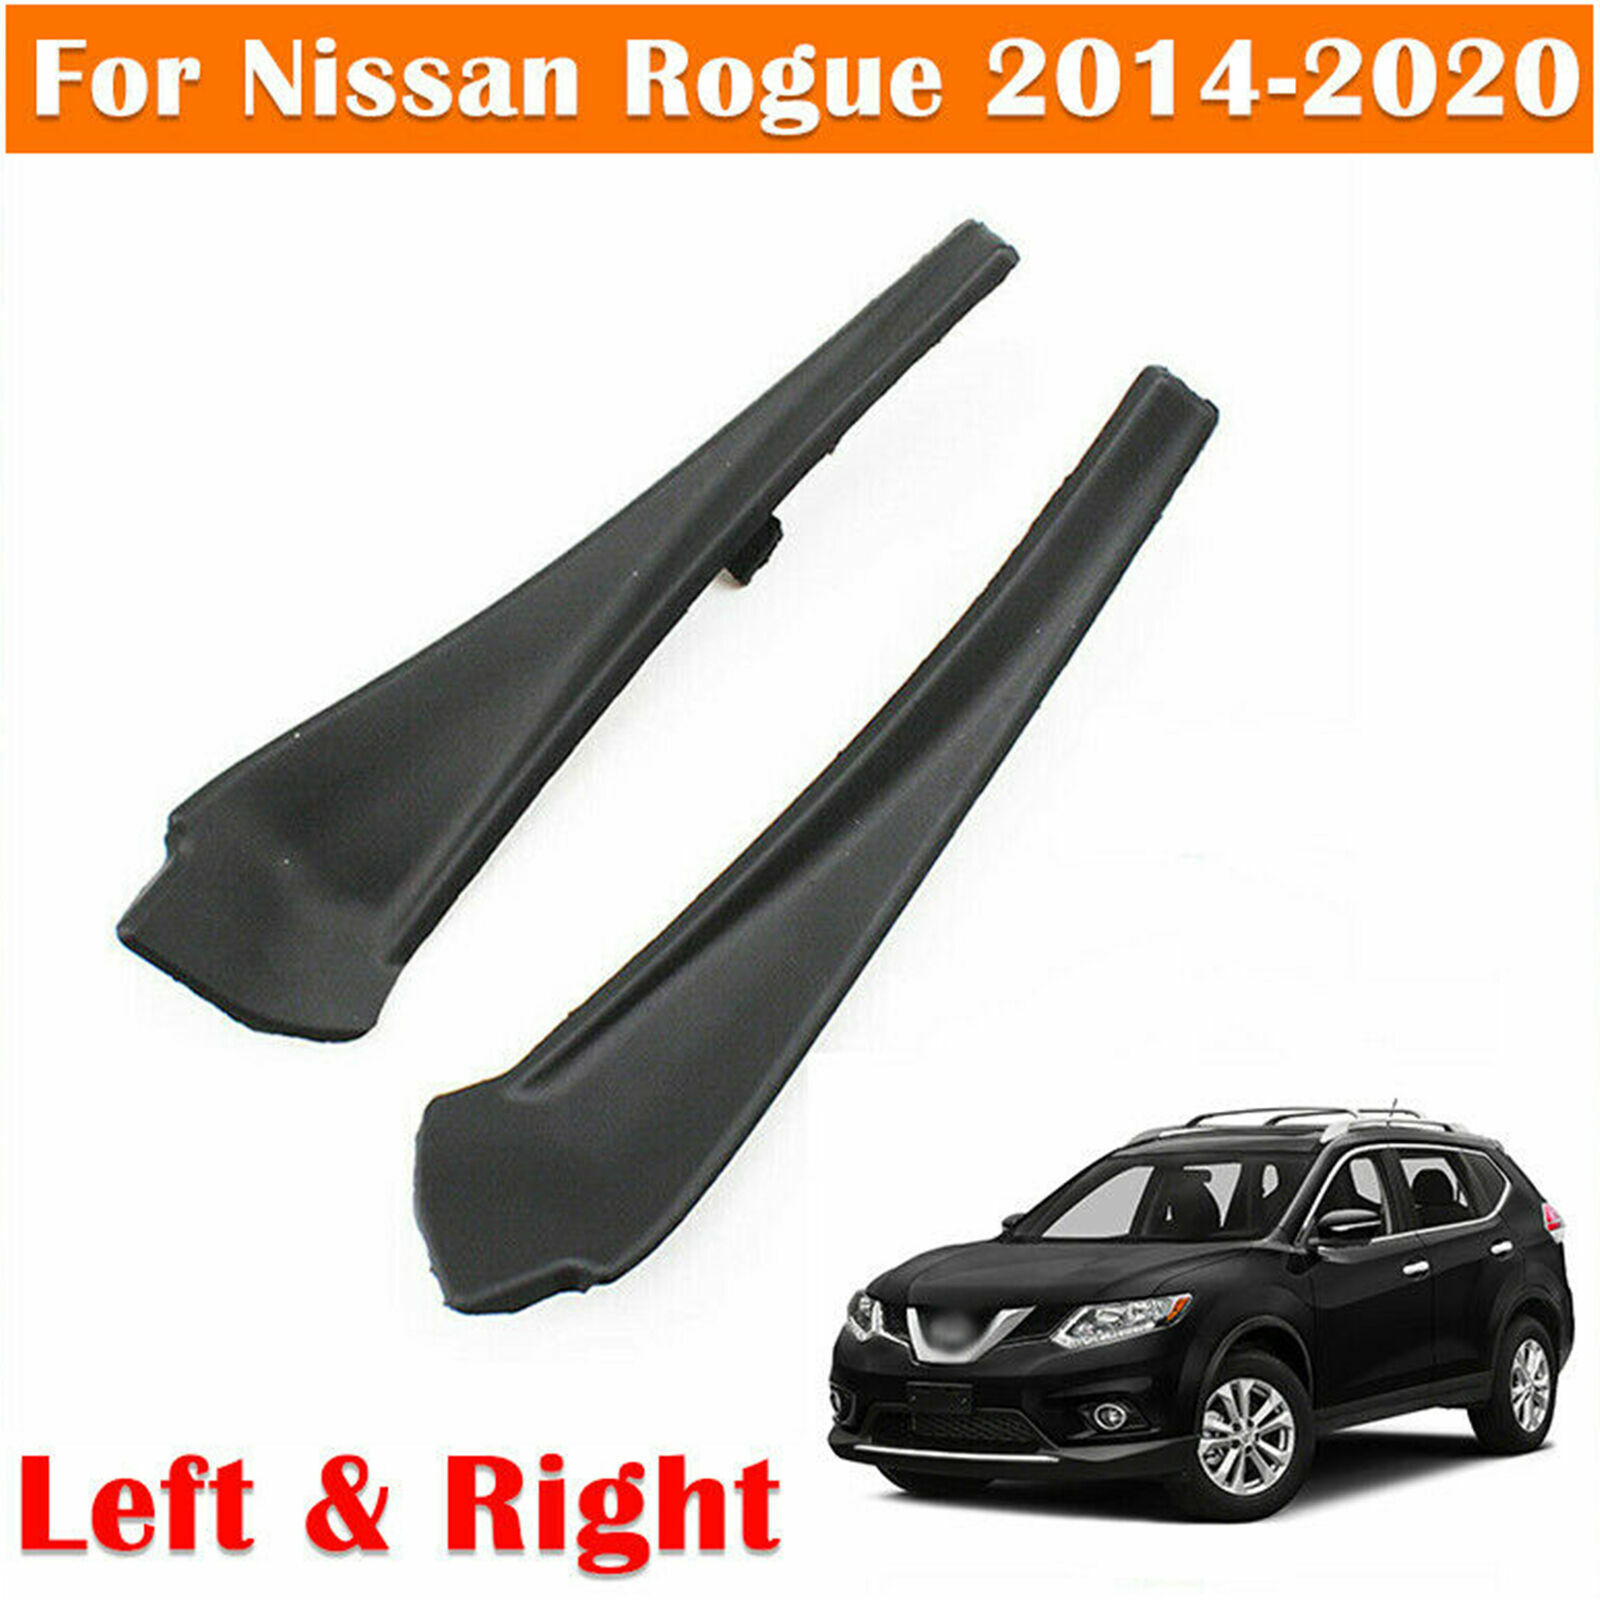 2pcs for Nissan Rogue 2014-2020 Front Wiper Side Cowl Extension Cover Trim Black